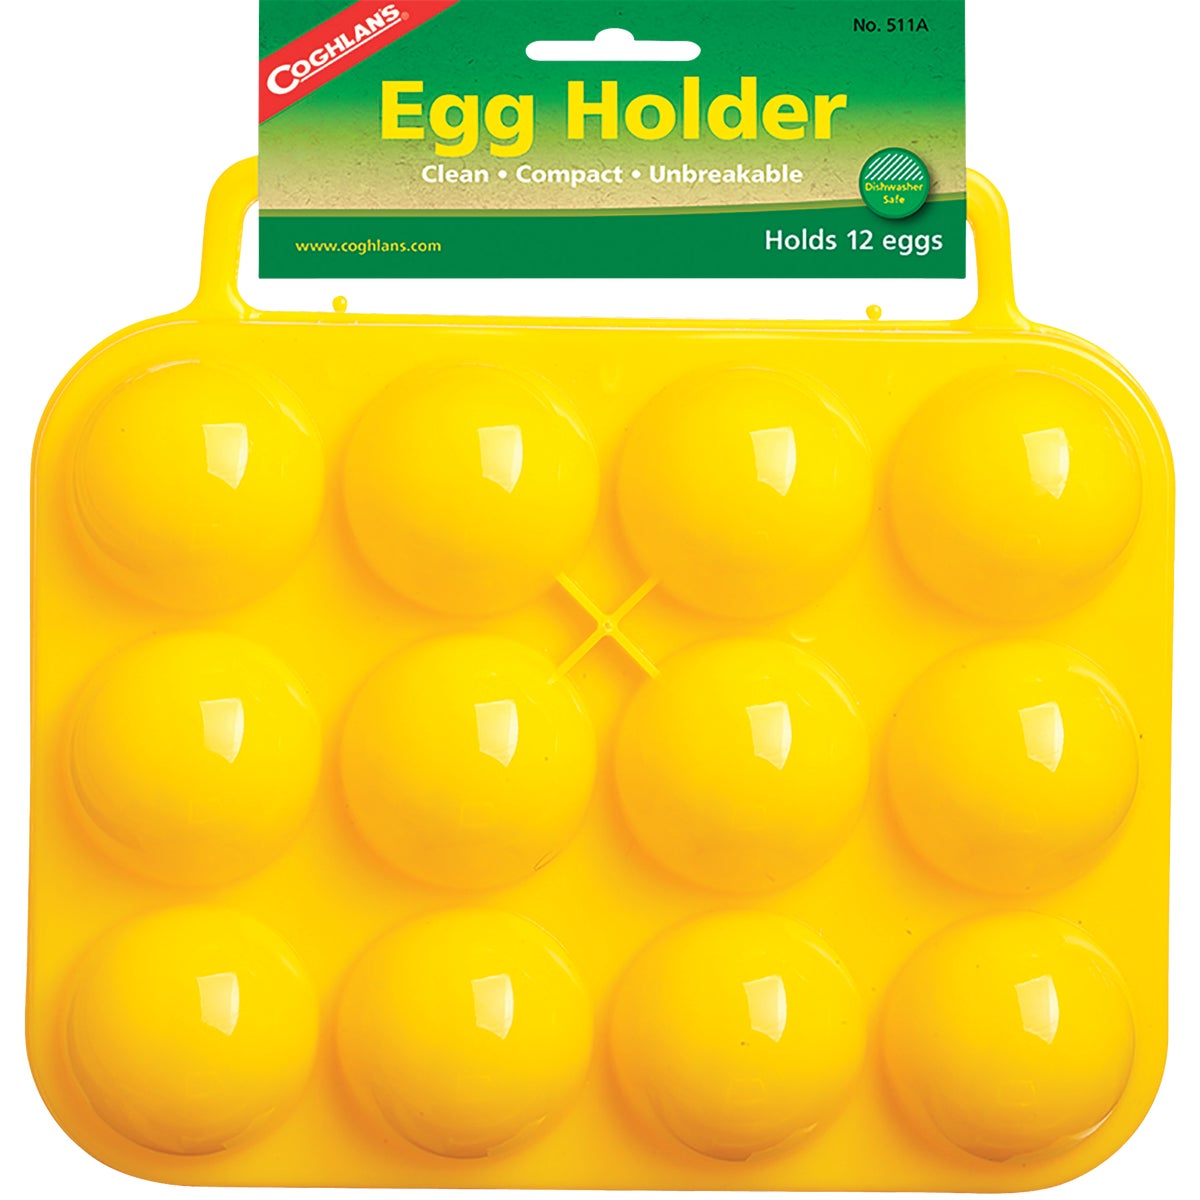 Item 705027, Egg holder made from a durable polypropylene copolymer that will not crush 